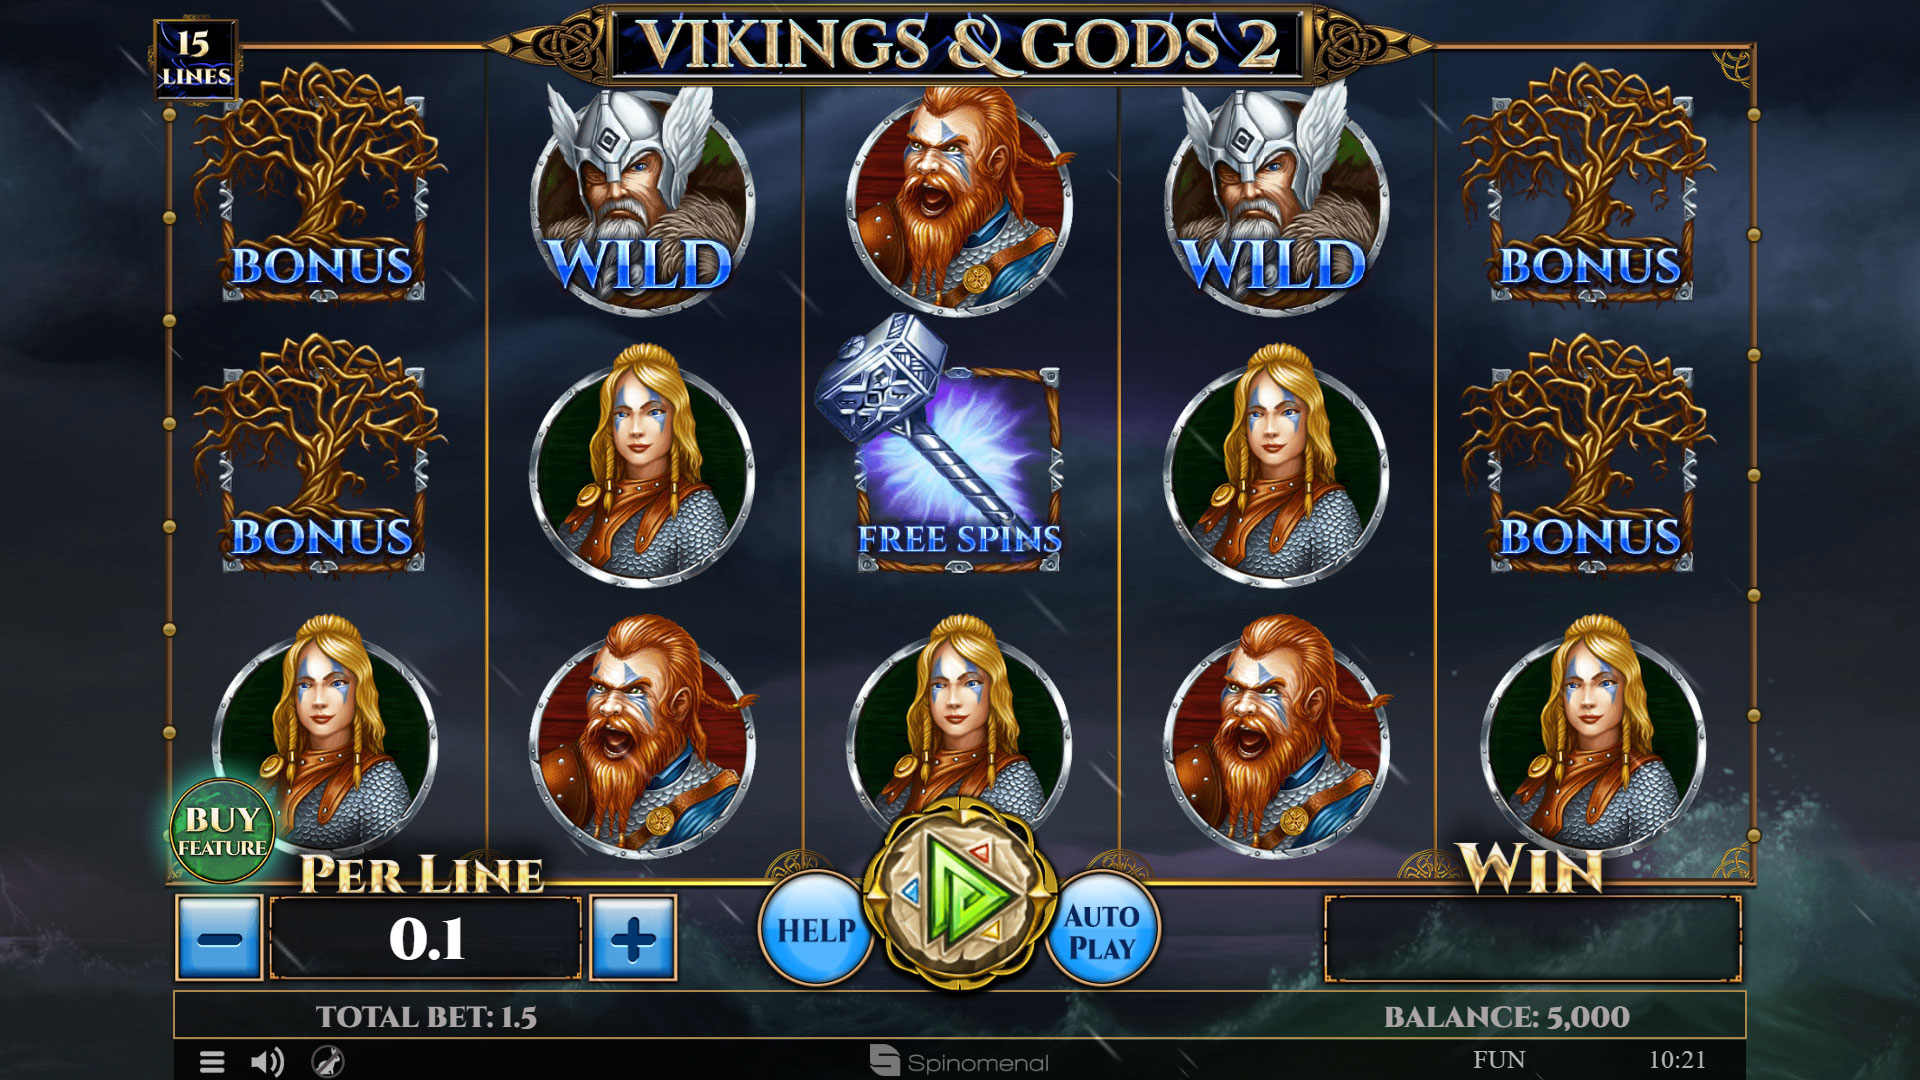 2020 viking slots casino review get вј200 100 free spins